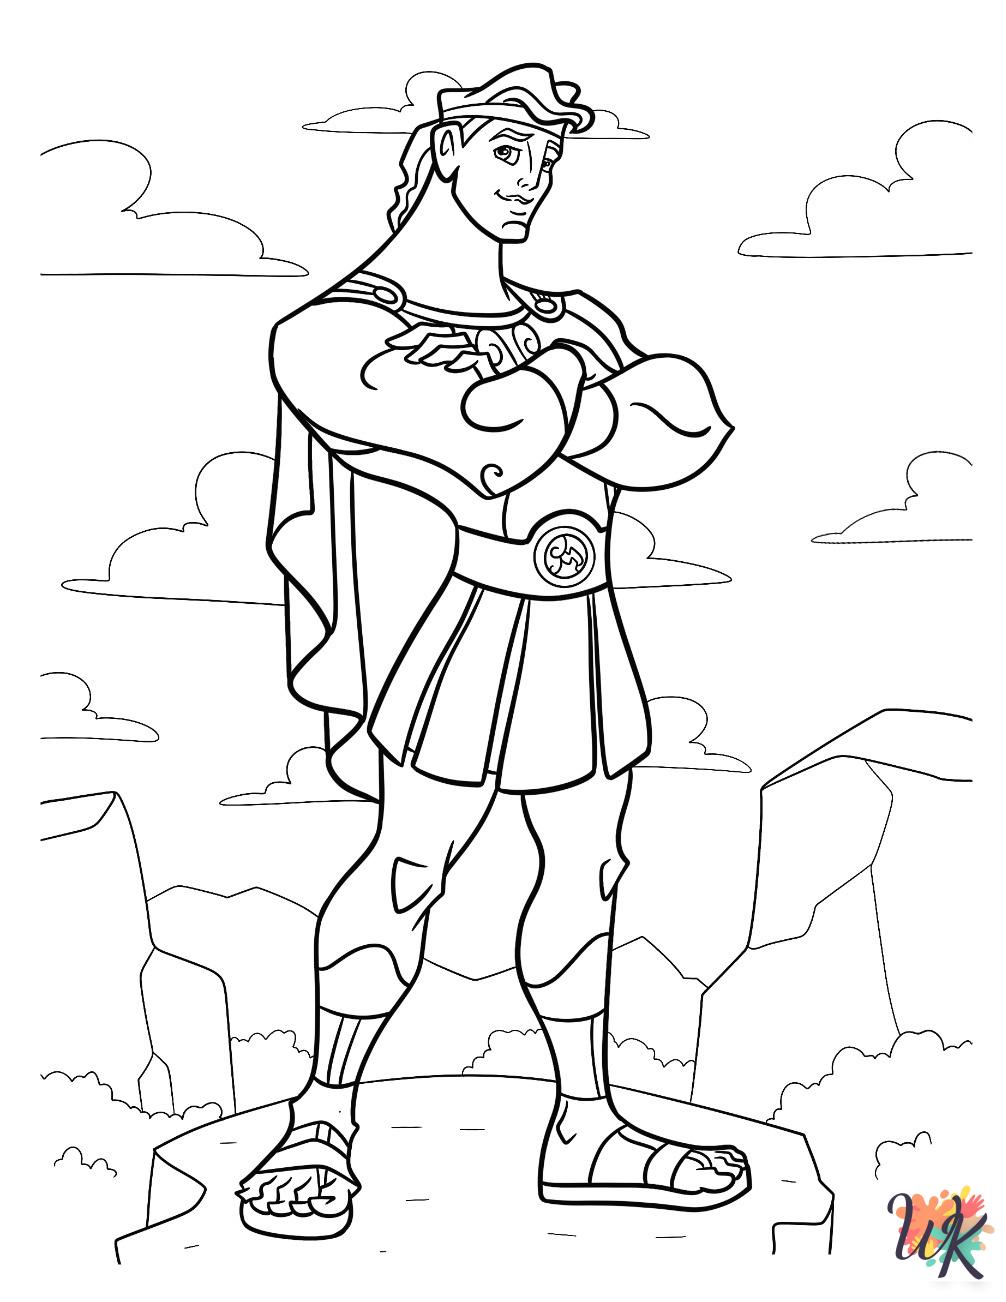 Hercules coloring pages for preschoolers